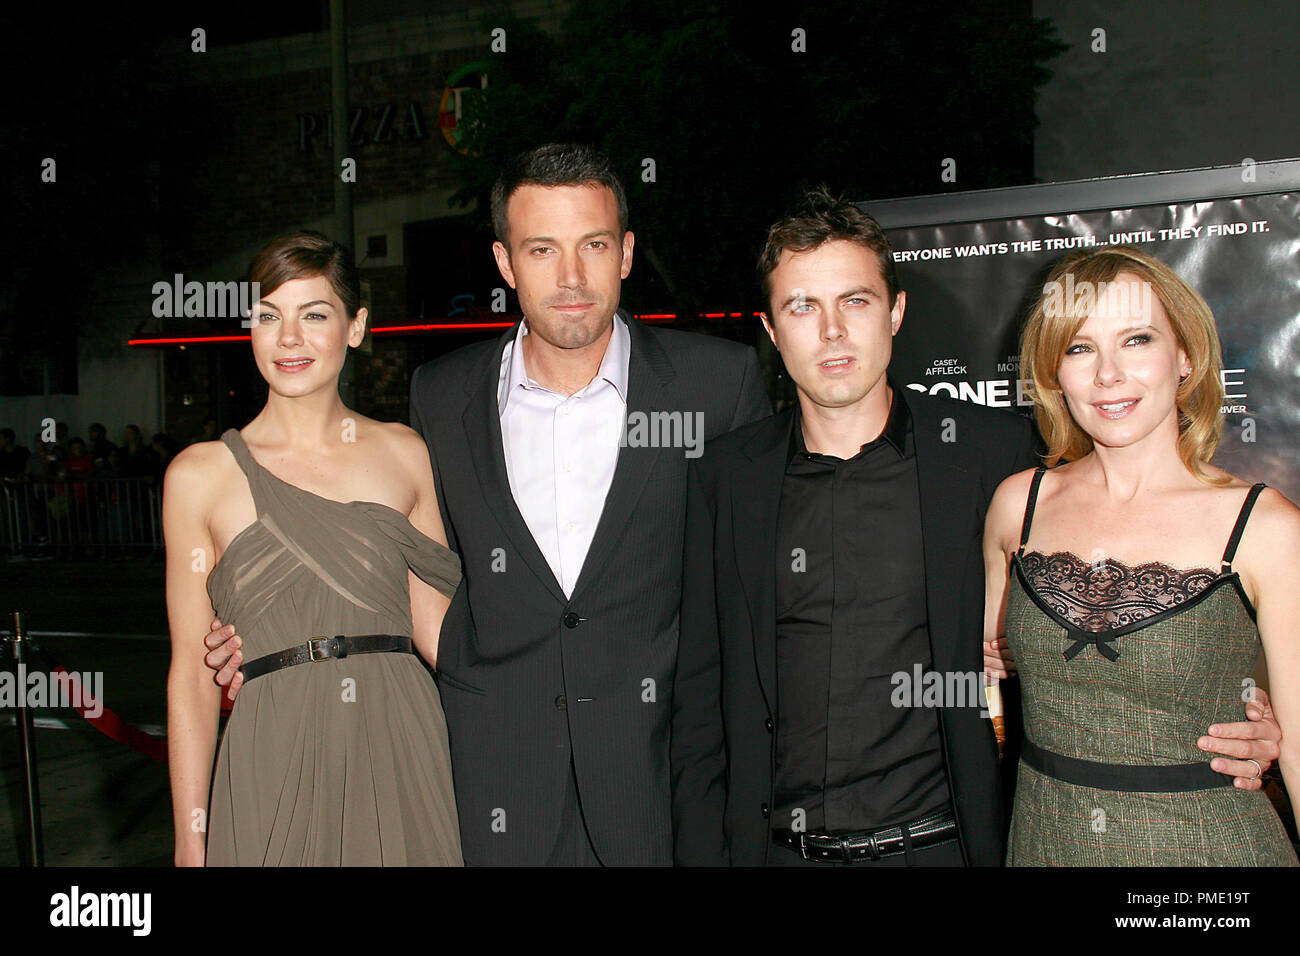 'Gone, Baby, Gone' (Premiere) Michelle Monaghan, Ben Affleck, Casey Affleck, Amy Ryan  10-8-2007 / Bruin Theatre / Westwood, CA / Miramax Films / Photo by Joseph Martinez File Reference # 23204 0055PLX   For Editorial Use Only -  All Rights Reserved Stock Photo